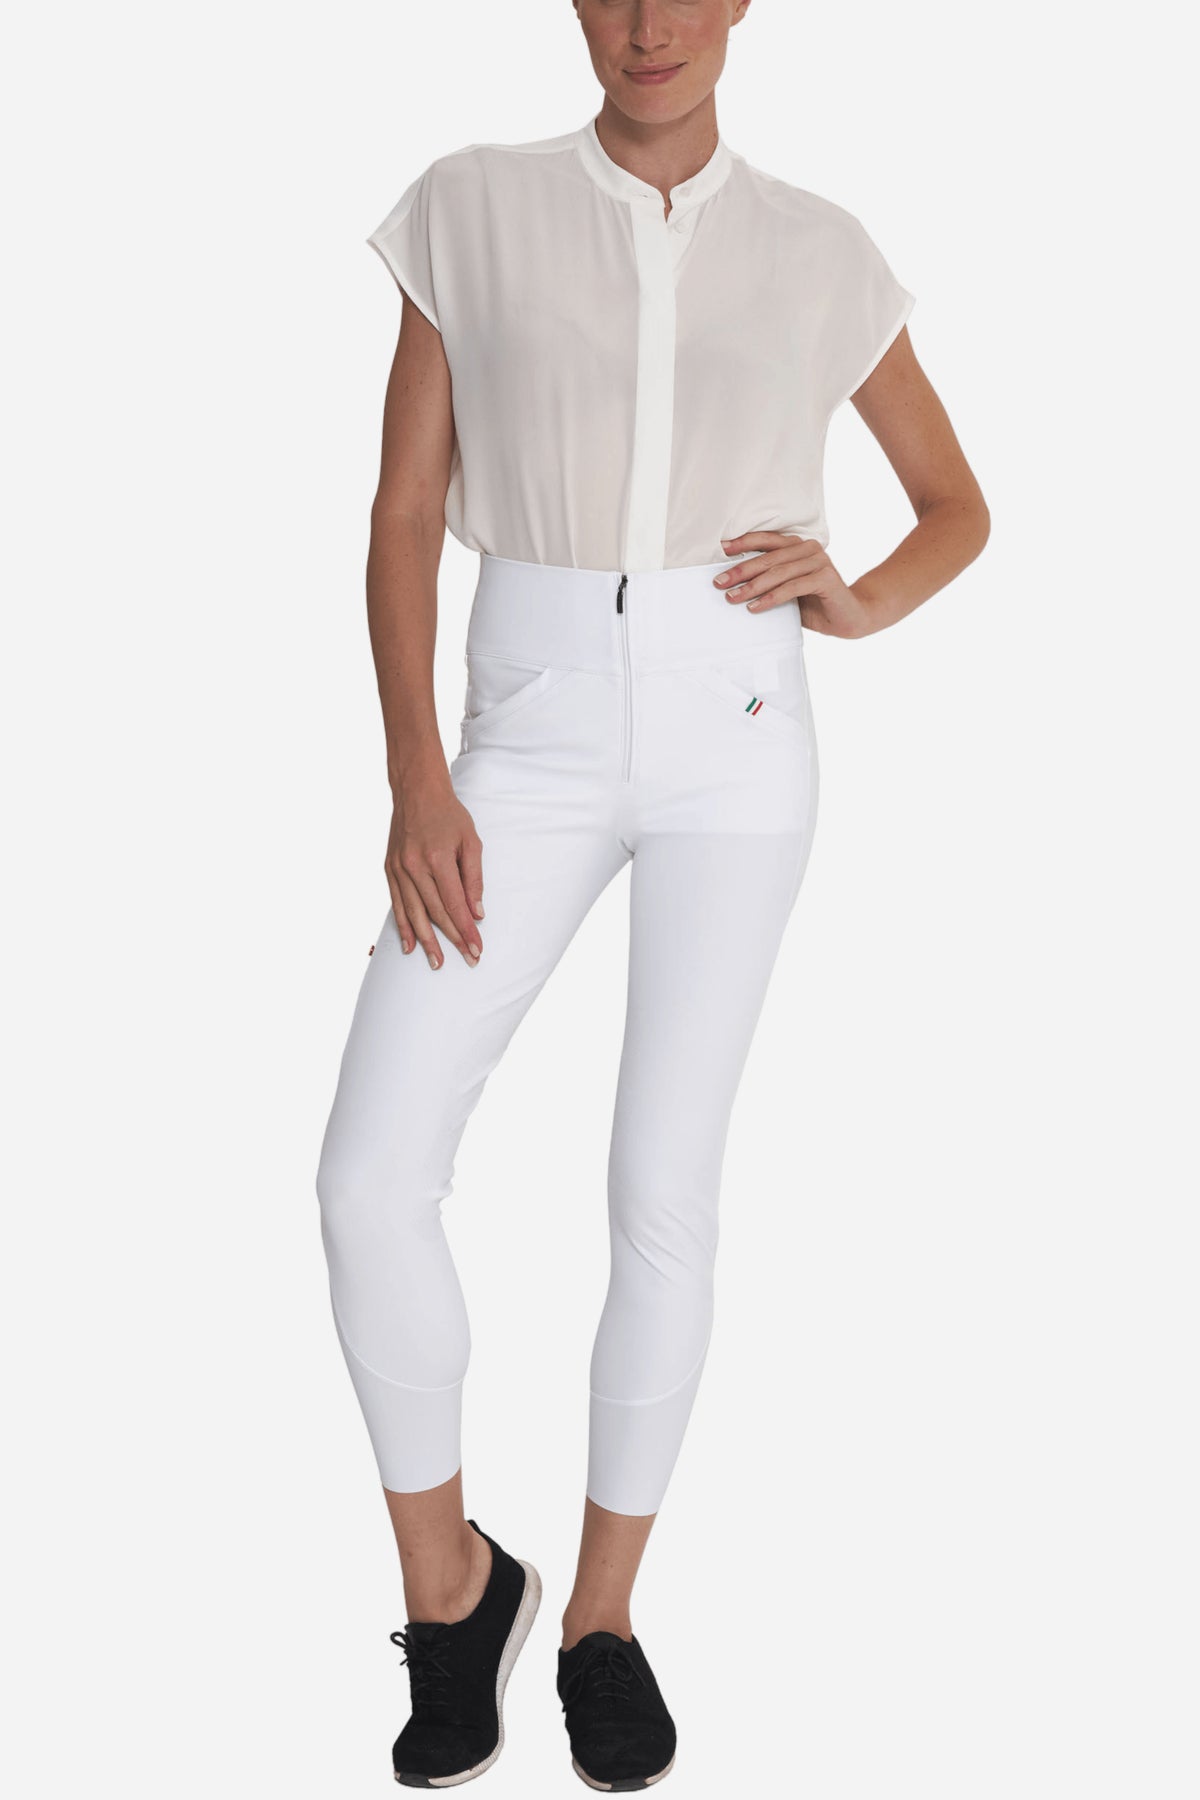 ForHorses  FRANCESCA Ultra Move Breeches, Equestrian Wear - For Horses  Italy Collections